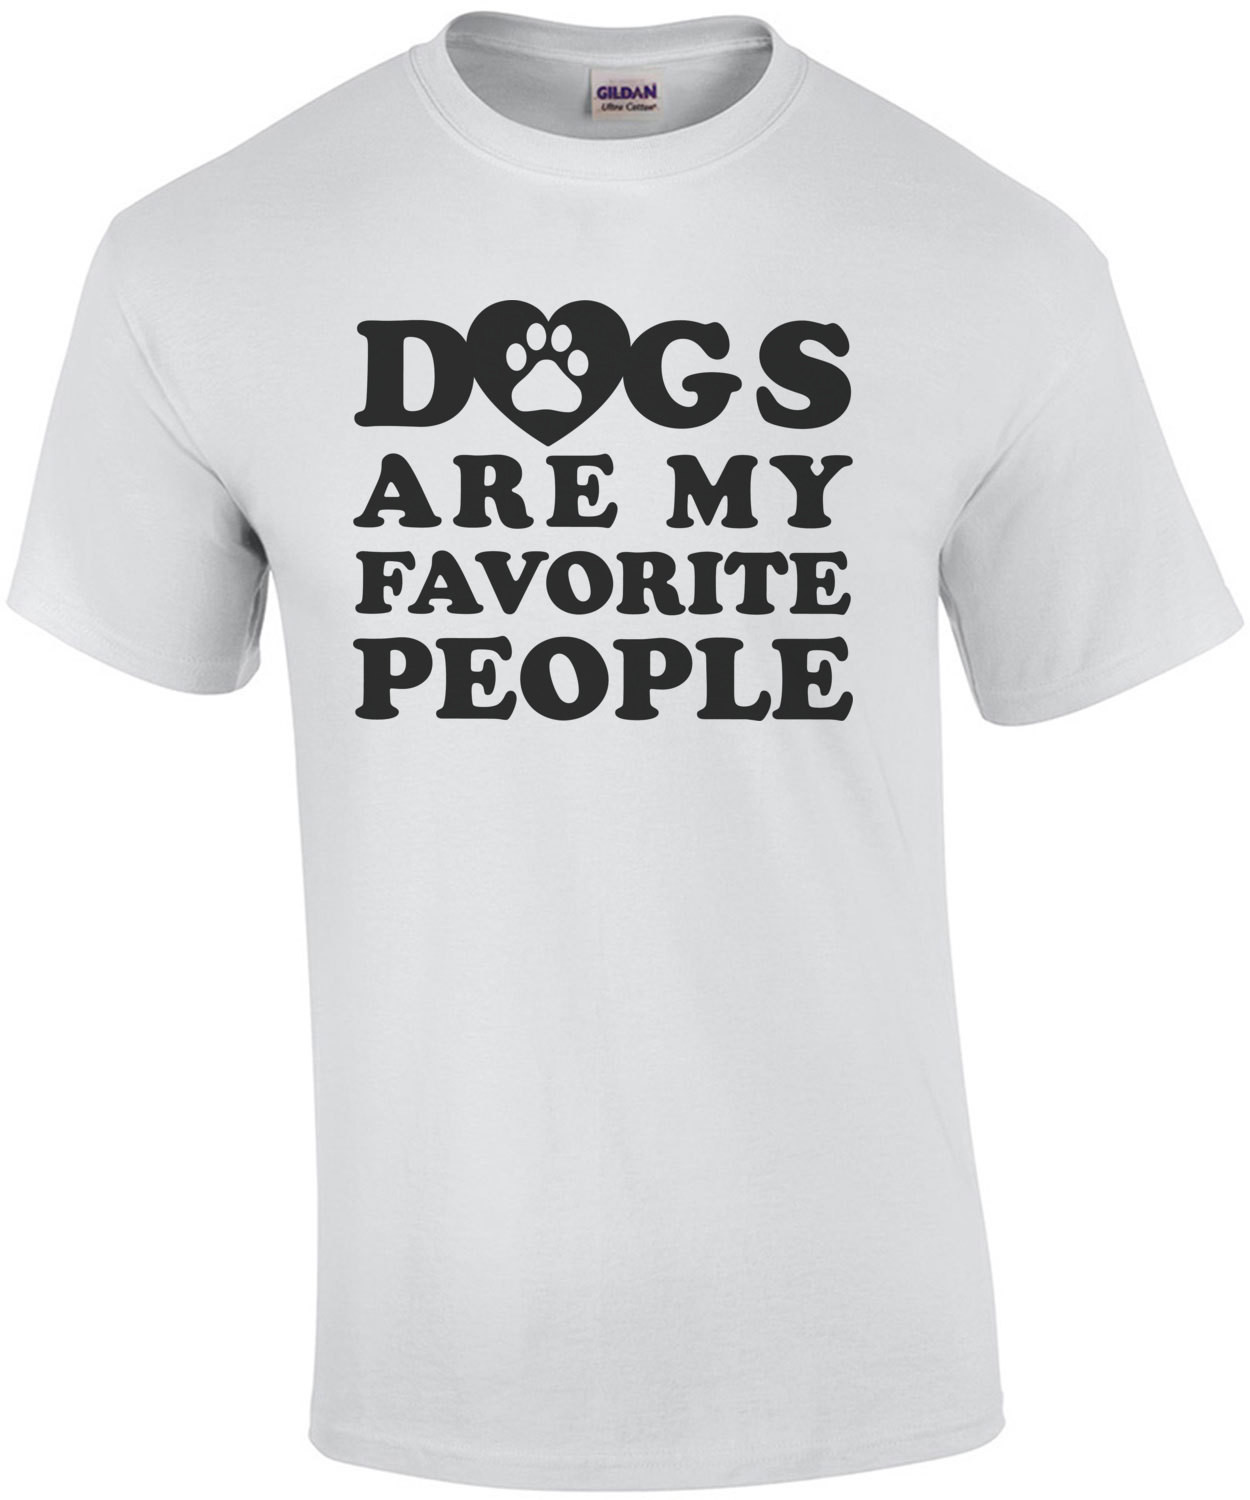 Dogs are my favorite people - funny dog lover t-shirt